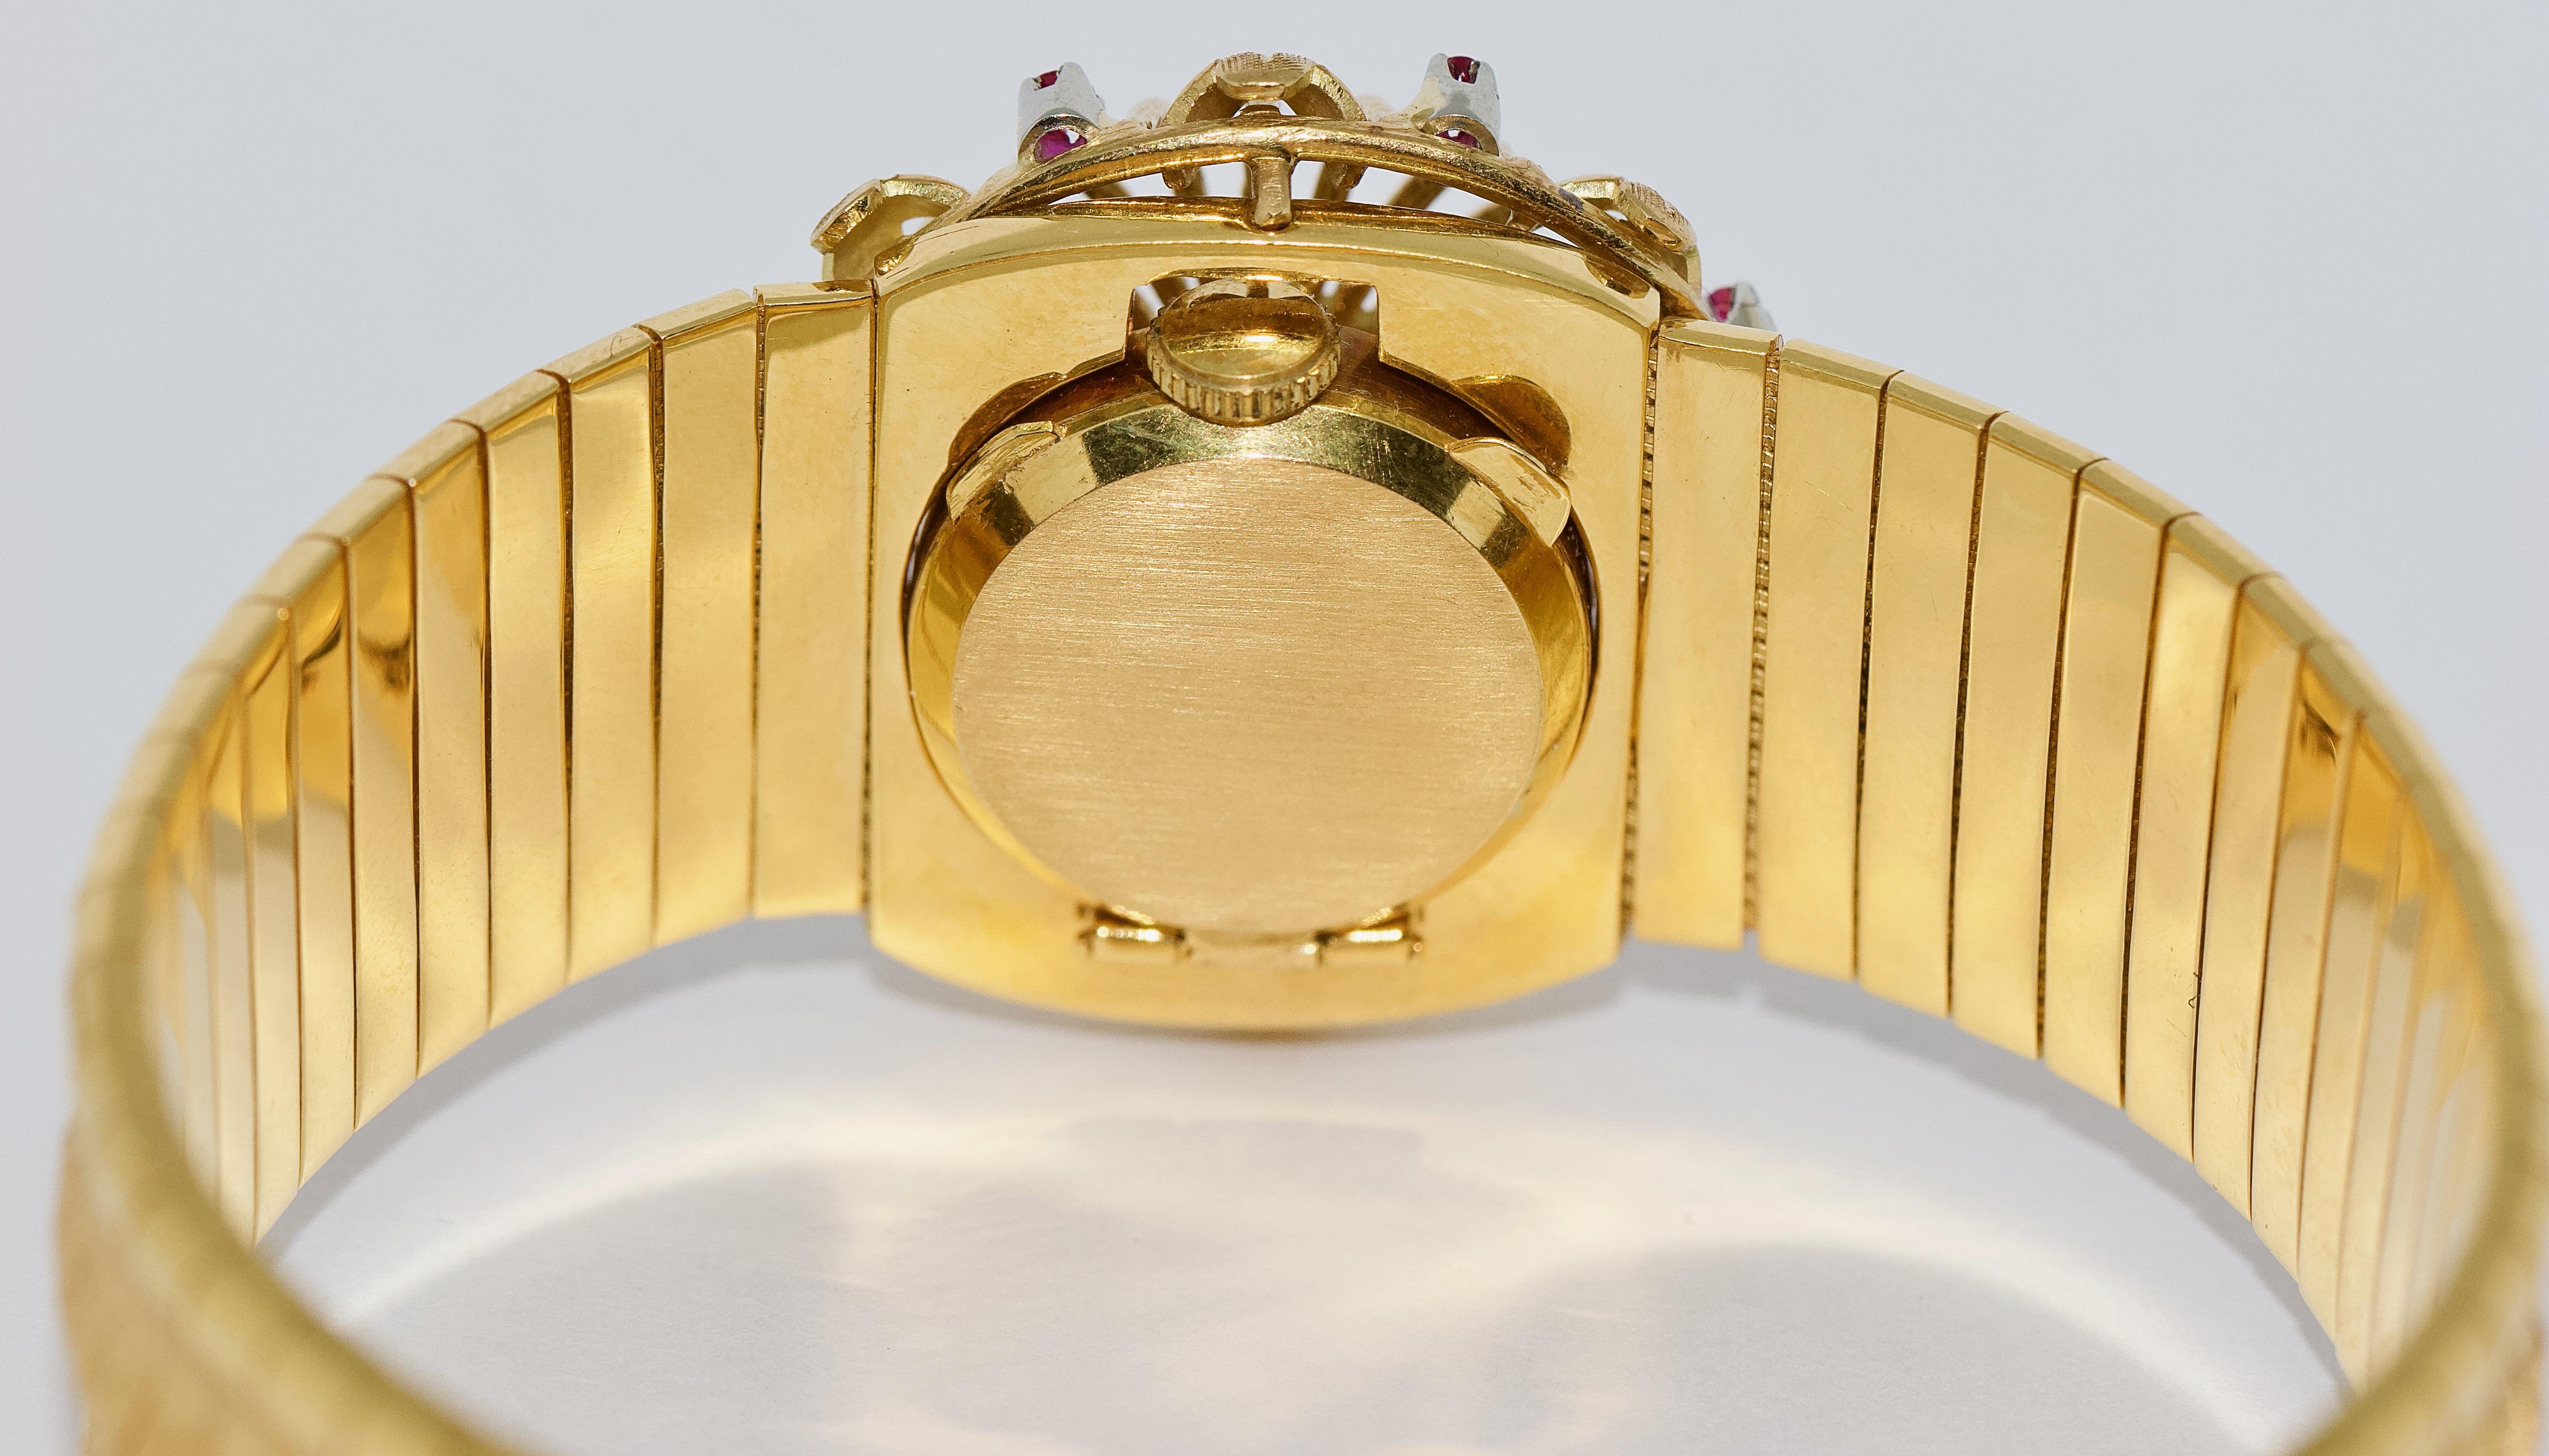 Women's Massive Ladies Wristwatch, Bracelet, 18 Karat Gold, with Rubies and Emerald For Sale